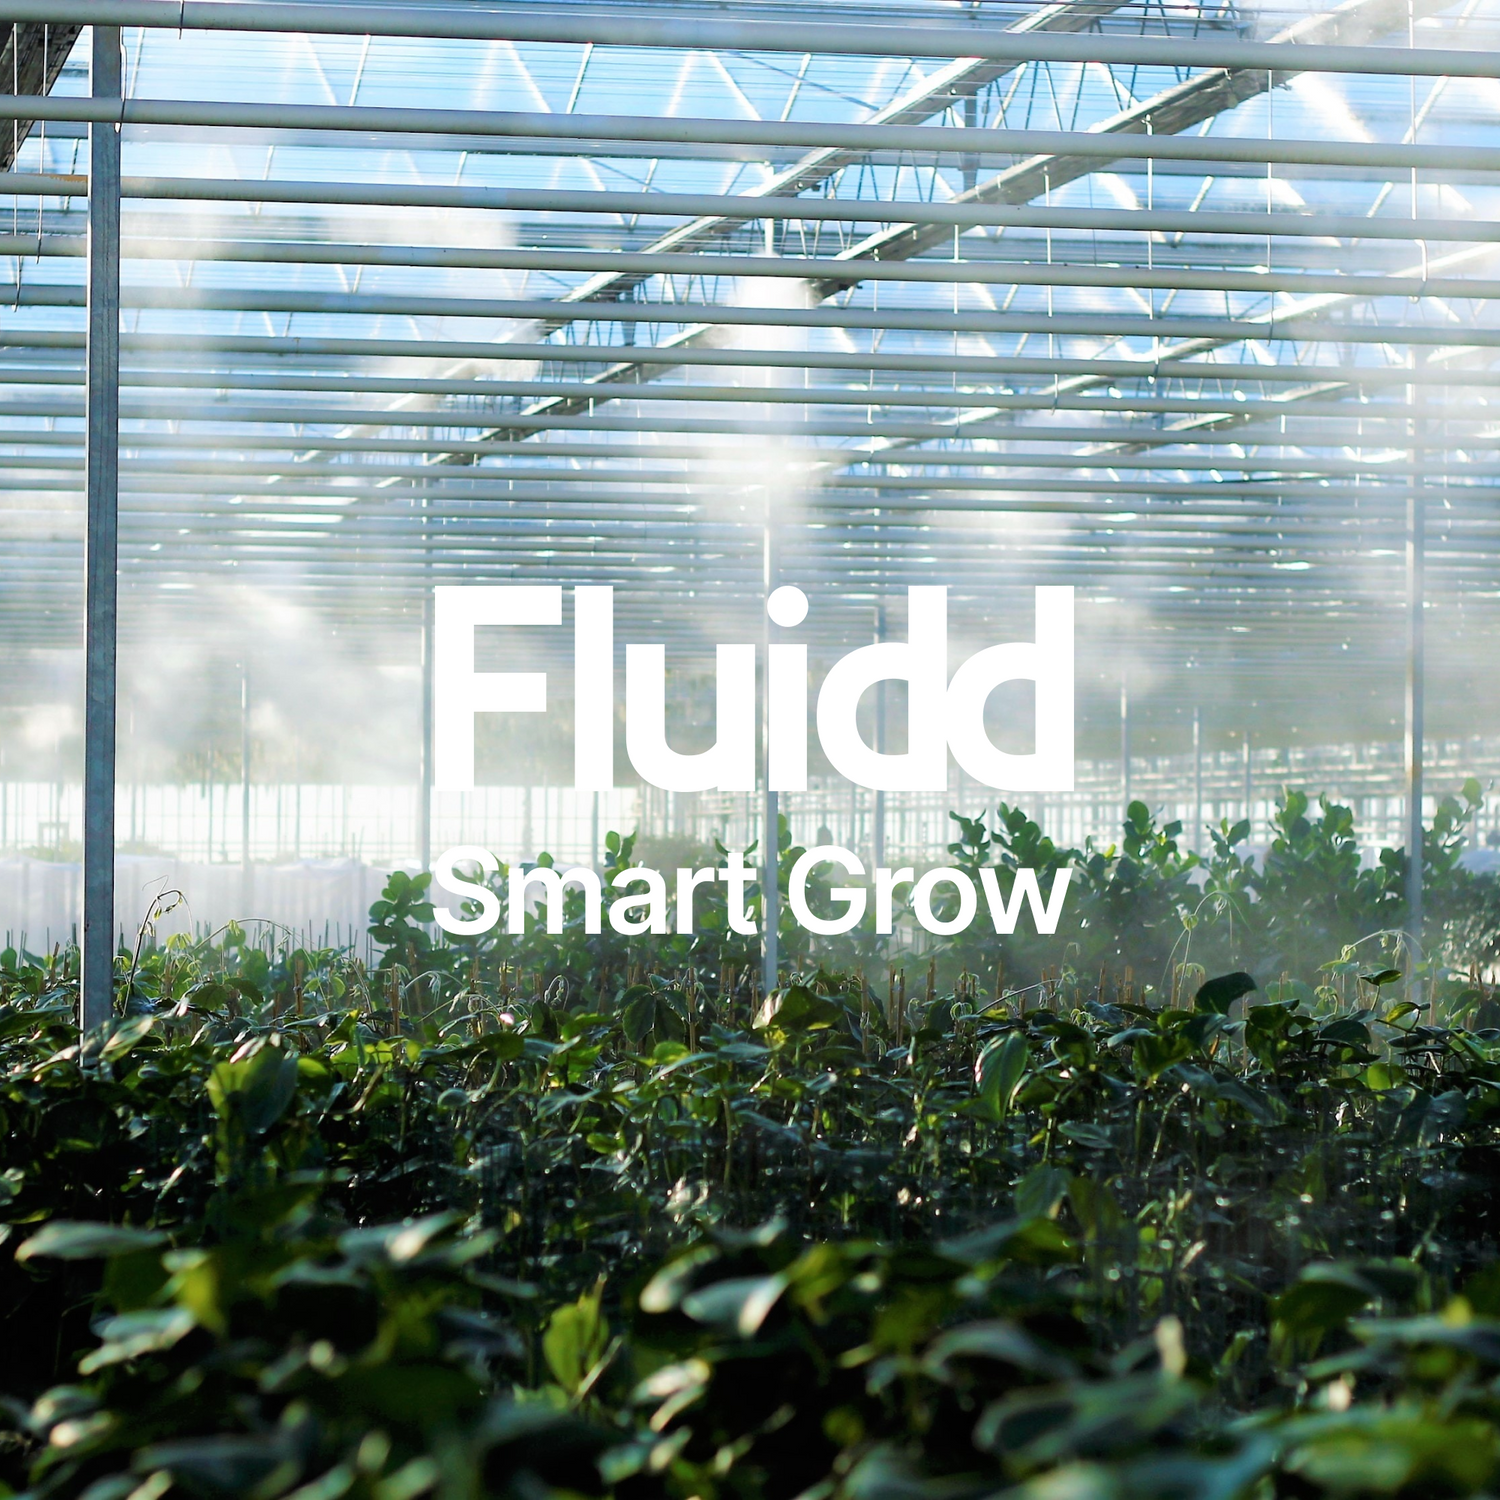 Fluidd Smart Grow: The Future of Indoor Gardening Using Smart Technology and Thread Networking